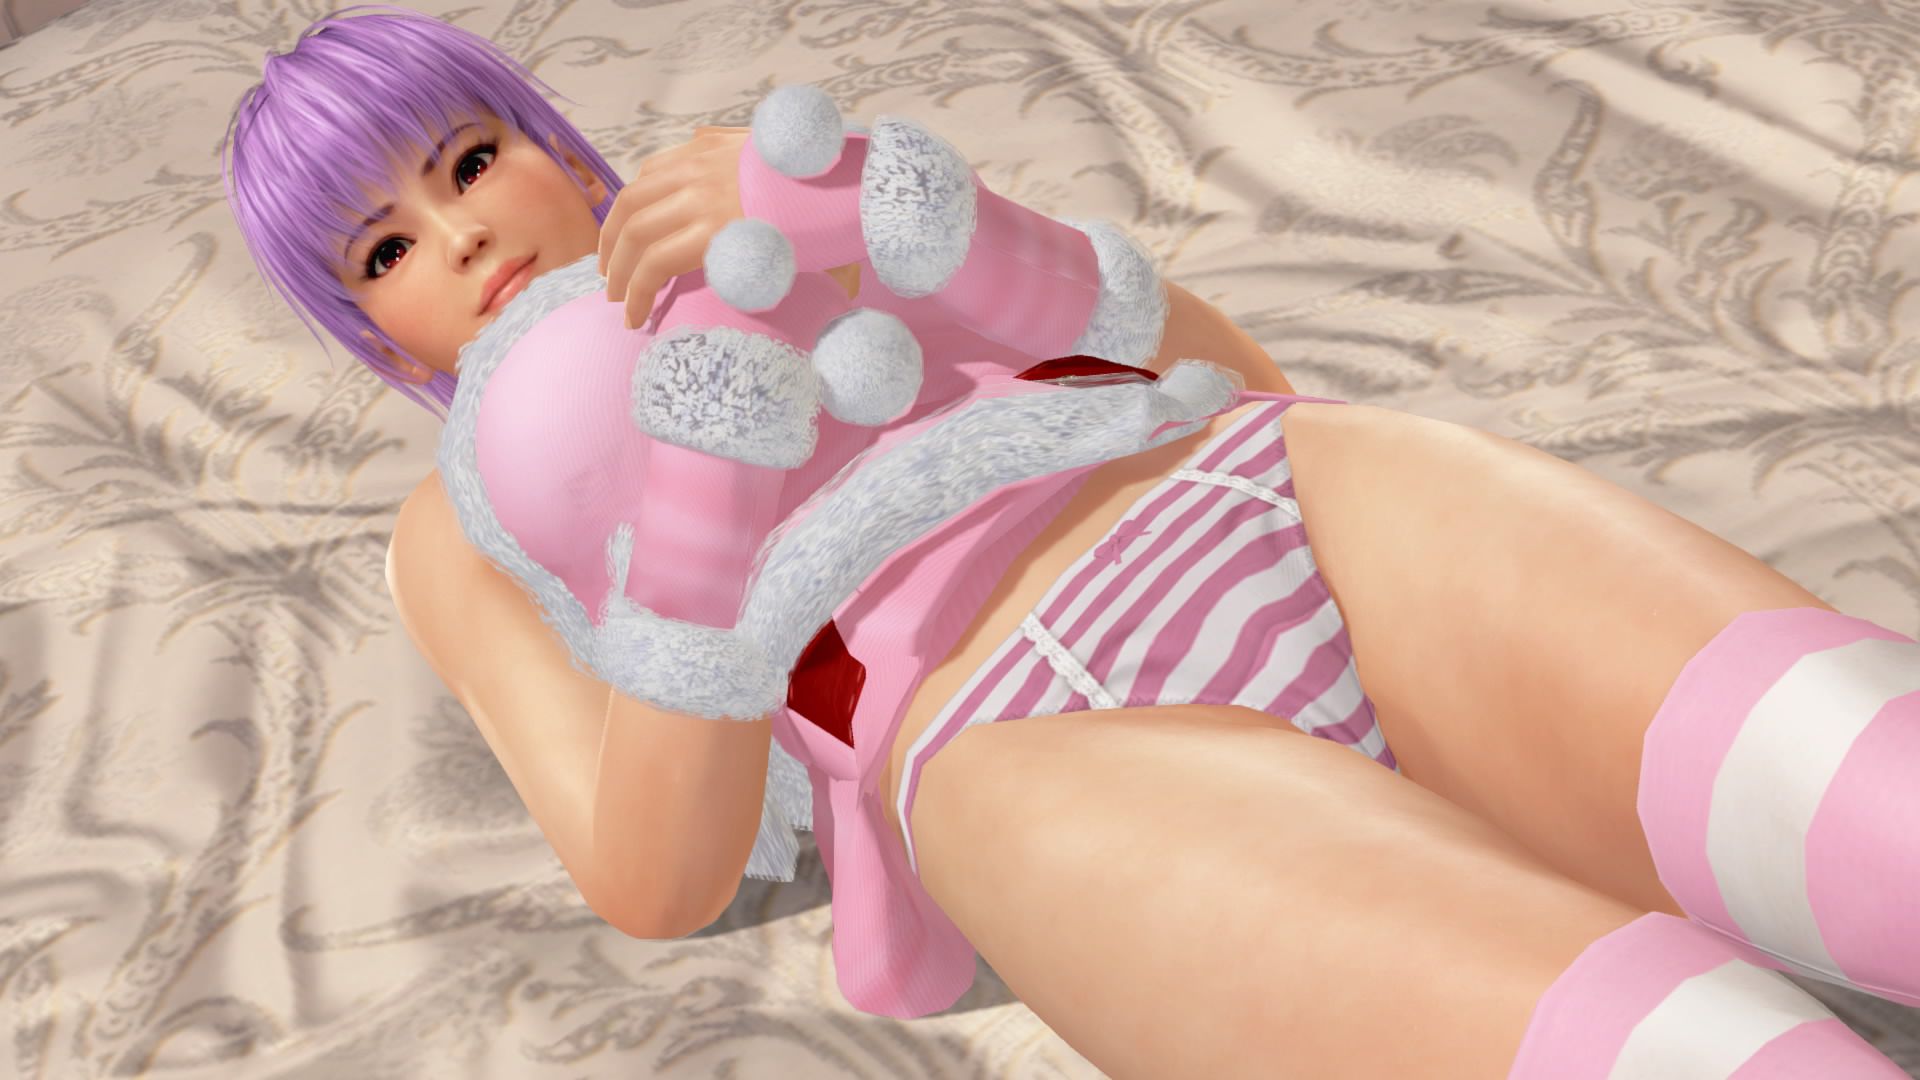 Doax3 "The color which suits the Aya-chan is pink" theory is verified 38